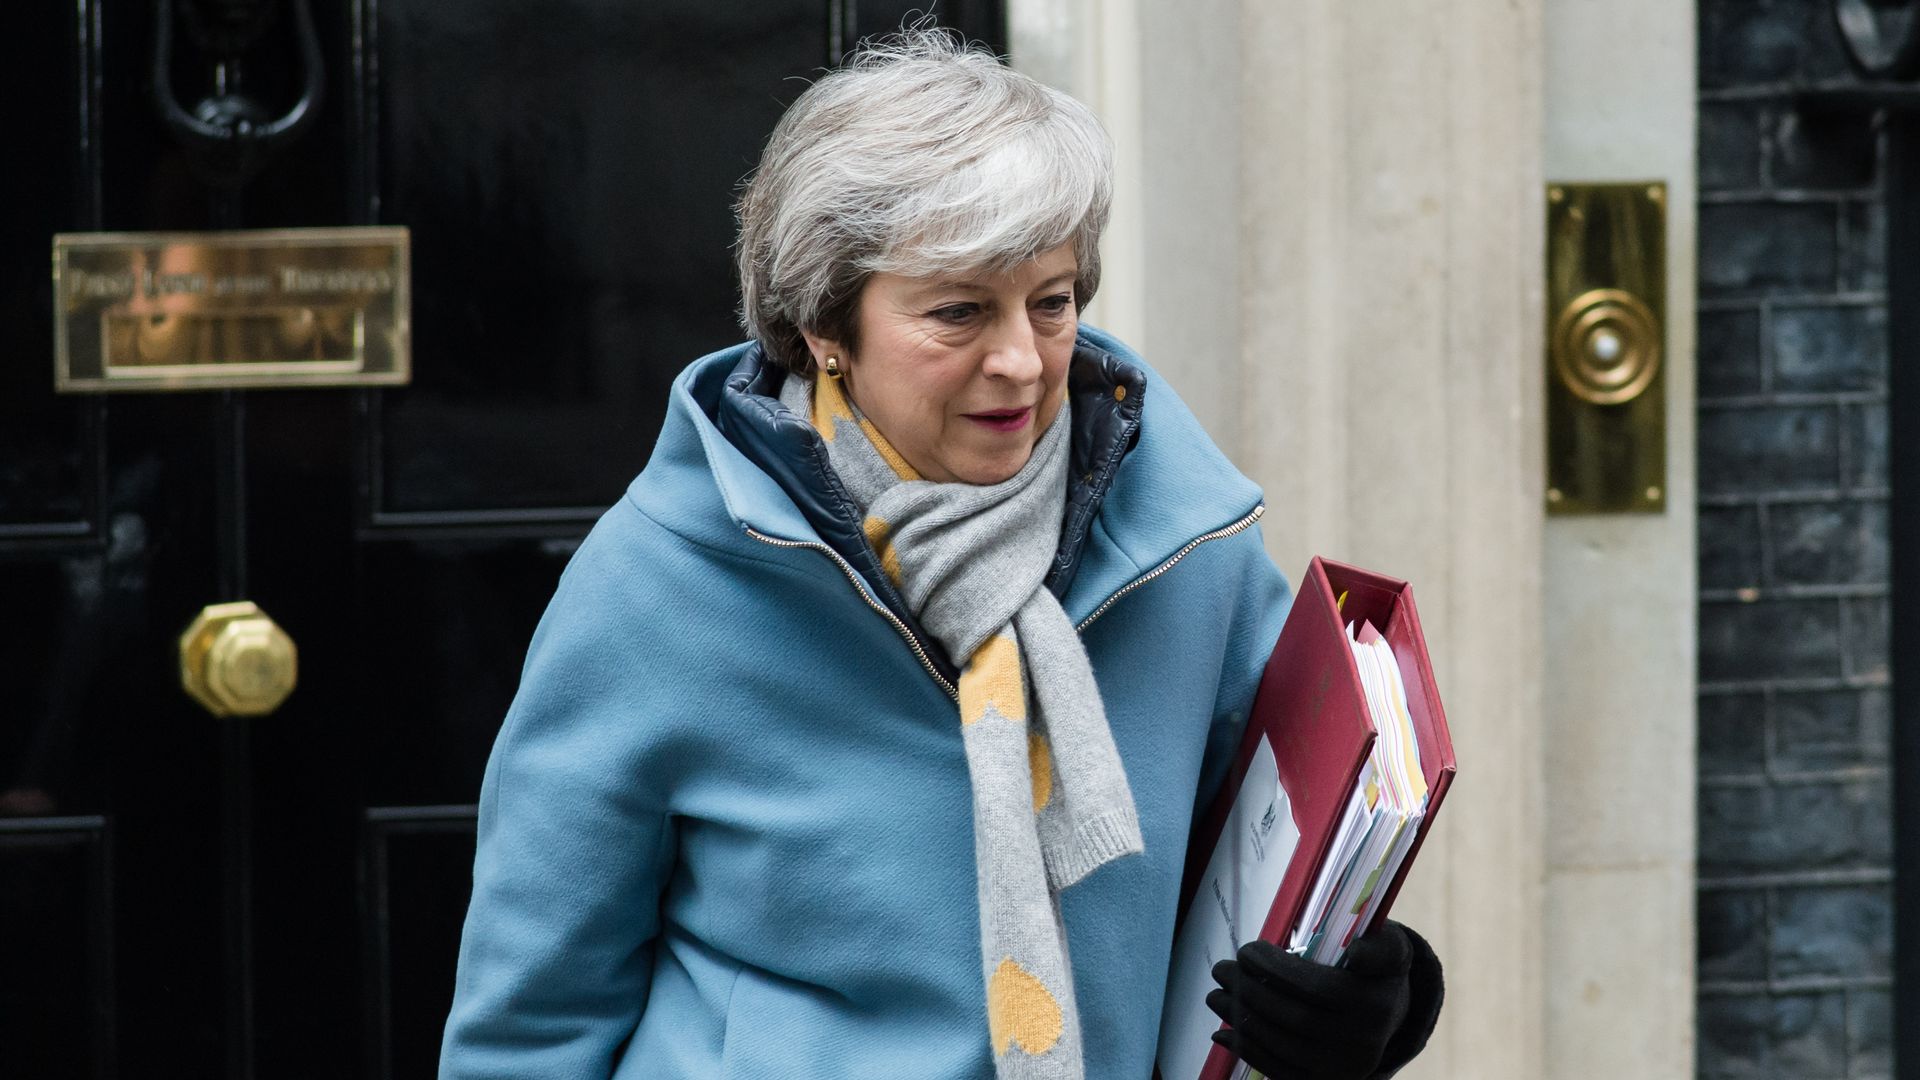 Theresa May walks out of a black doorway while holding a binder and wearing a winter coat.